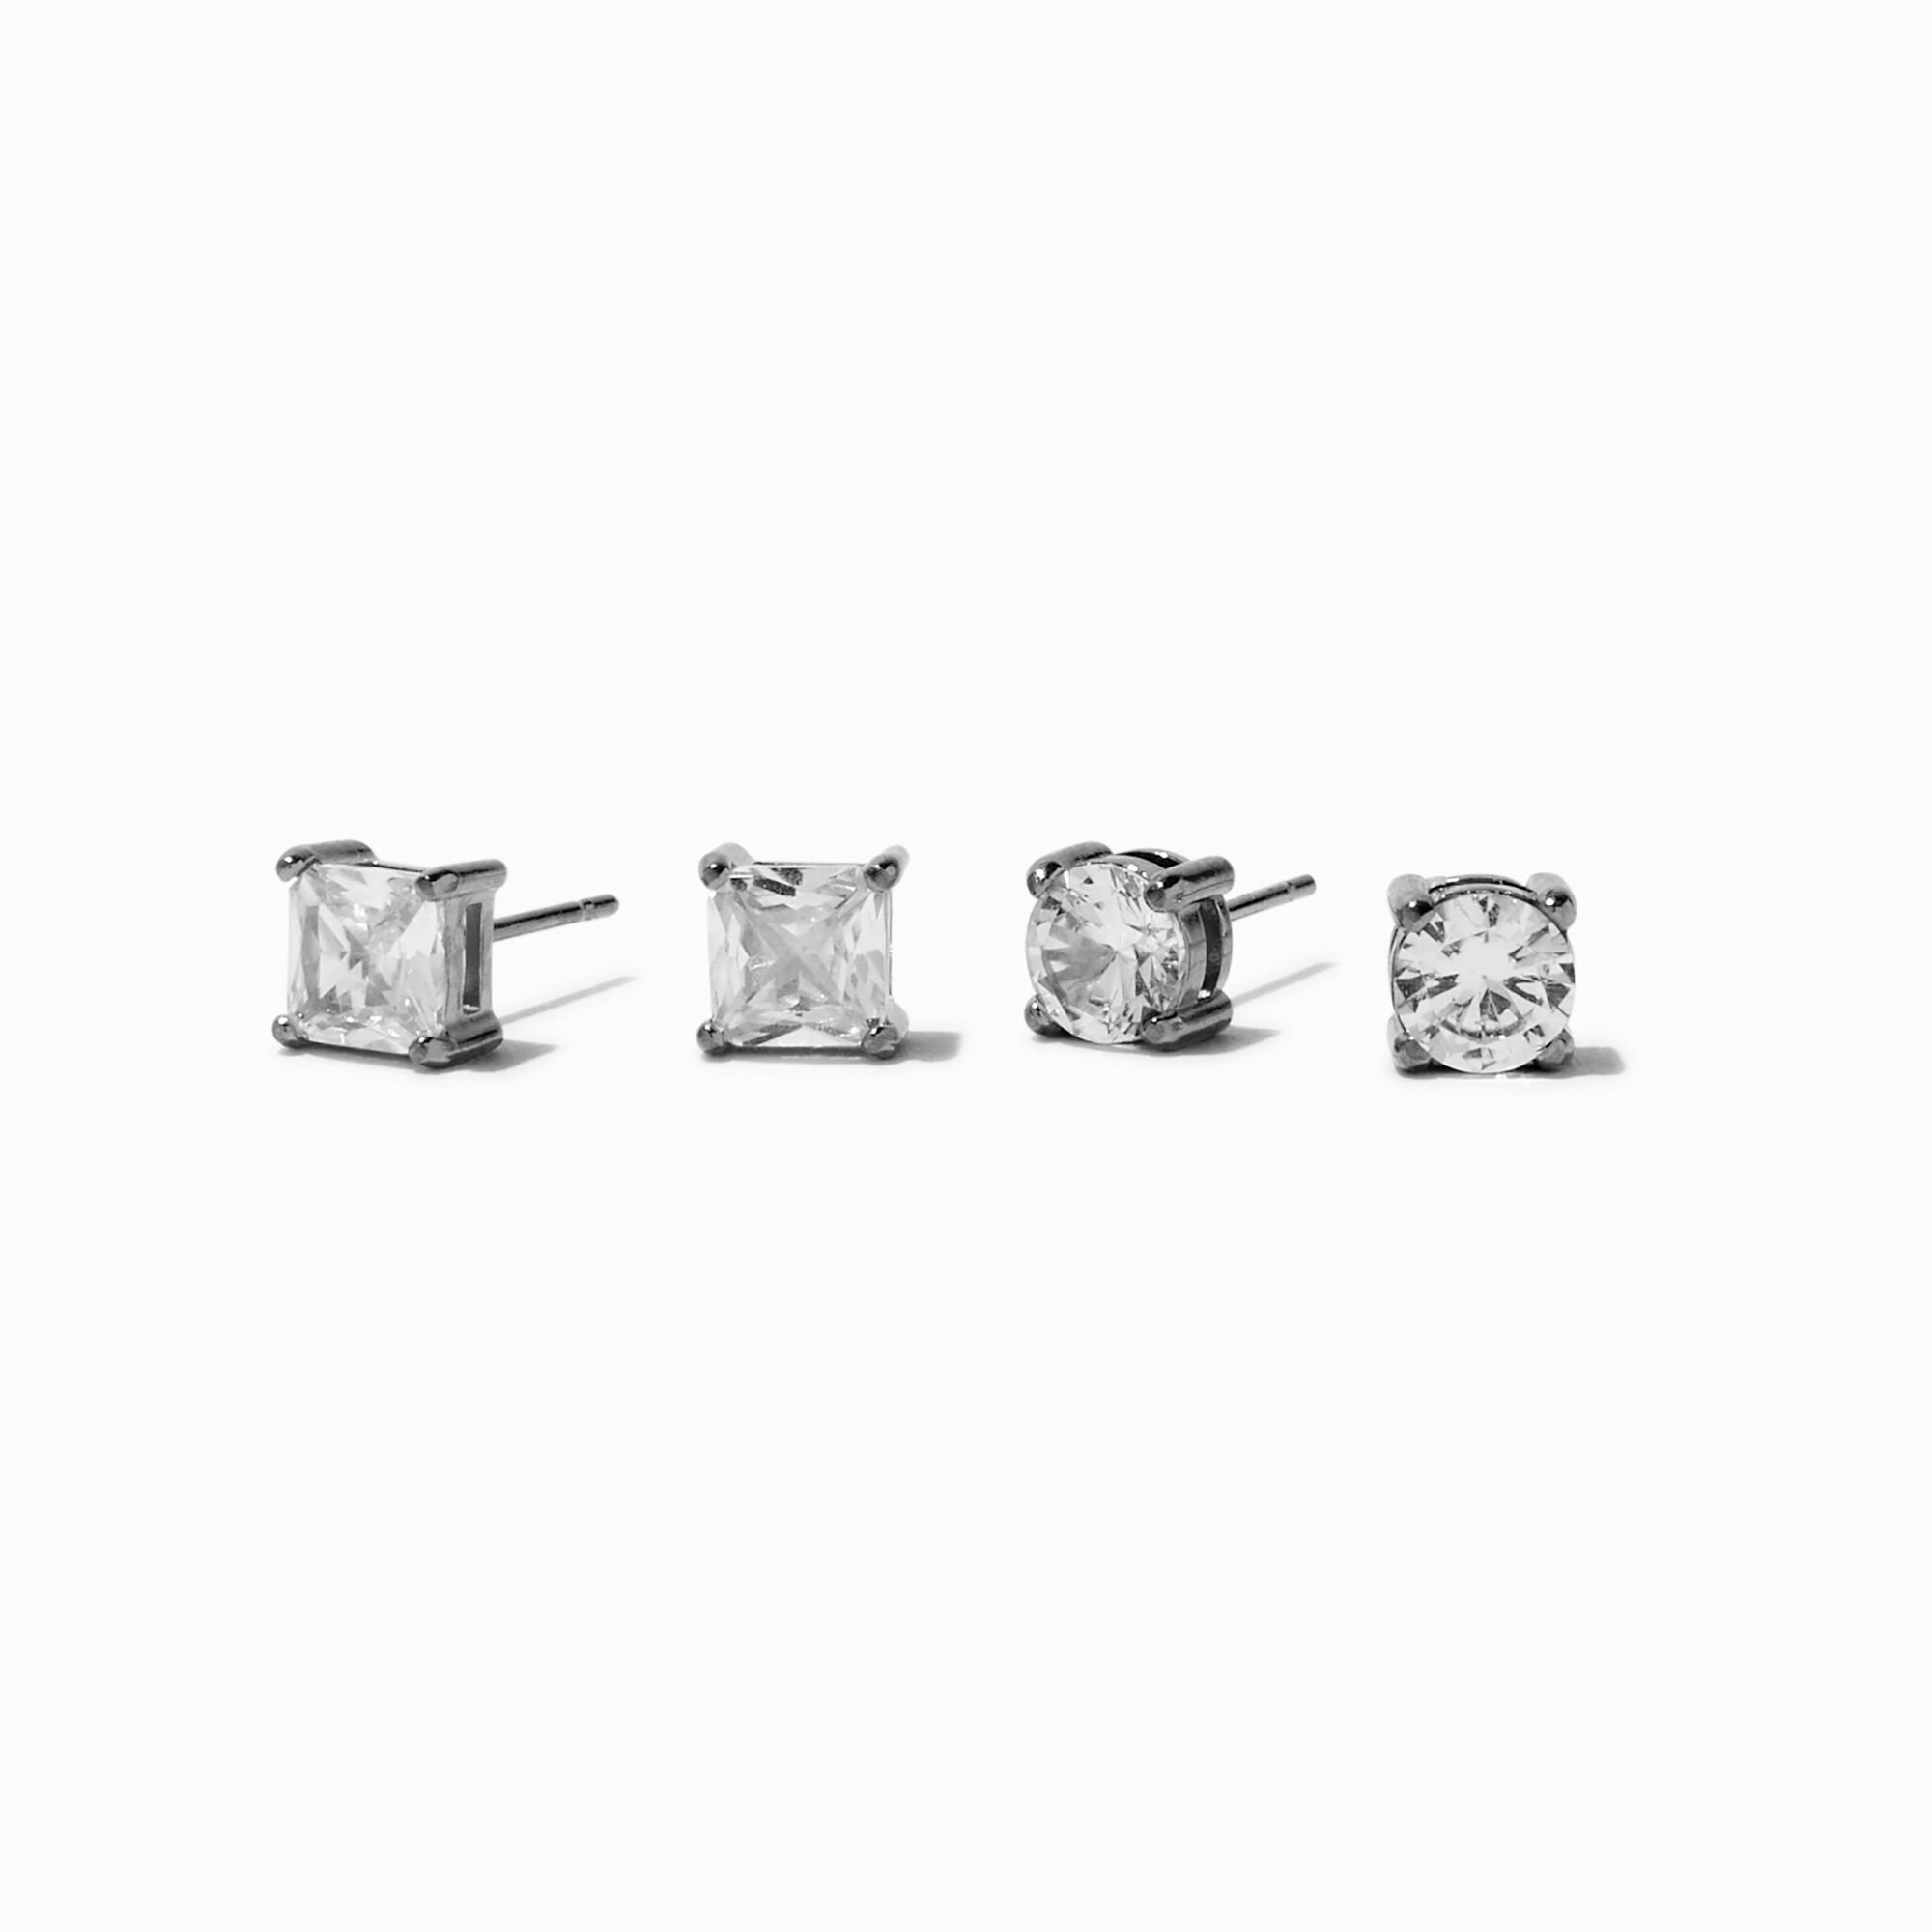 View Claires Tone Stainless Steel Cubic Zirconia 6MM Square Round Stud Earrings 2 Pack Silver information